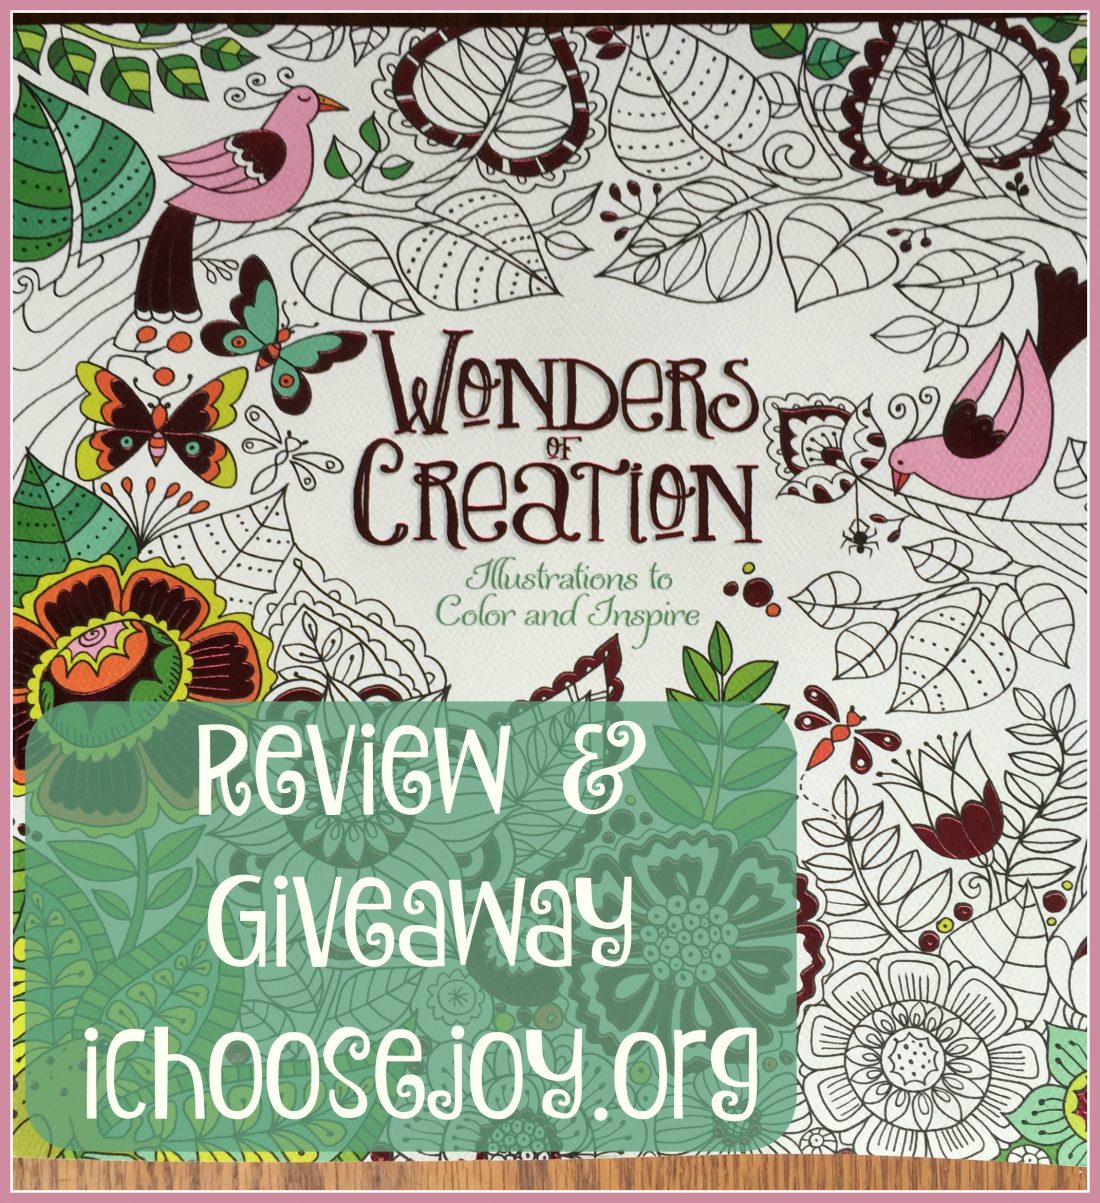 Review & Giveaway: Wonders of Creation: Illustrations to Color and Inspire